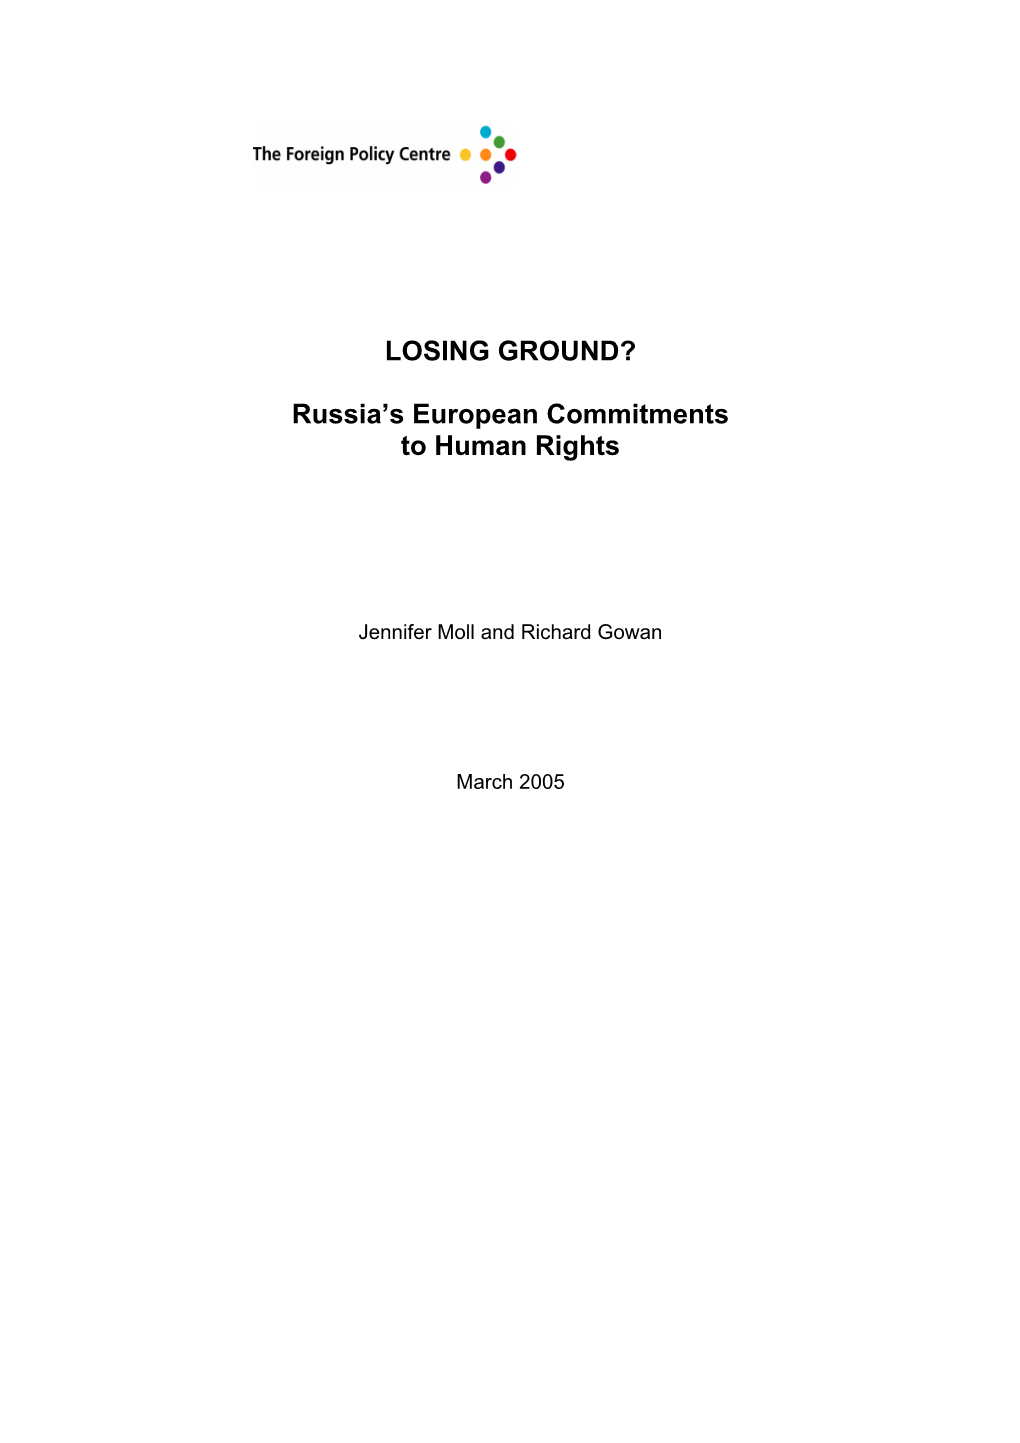 Russia's European Commitments to Human Rights